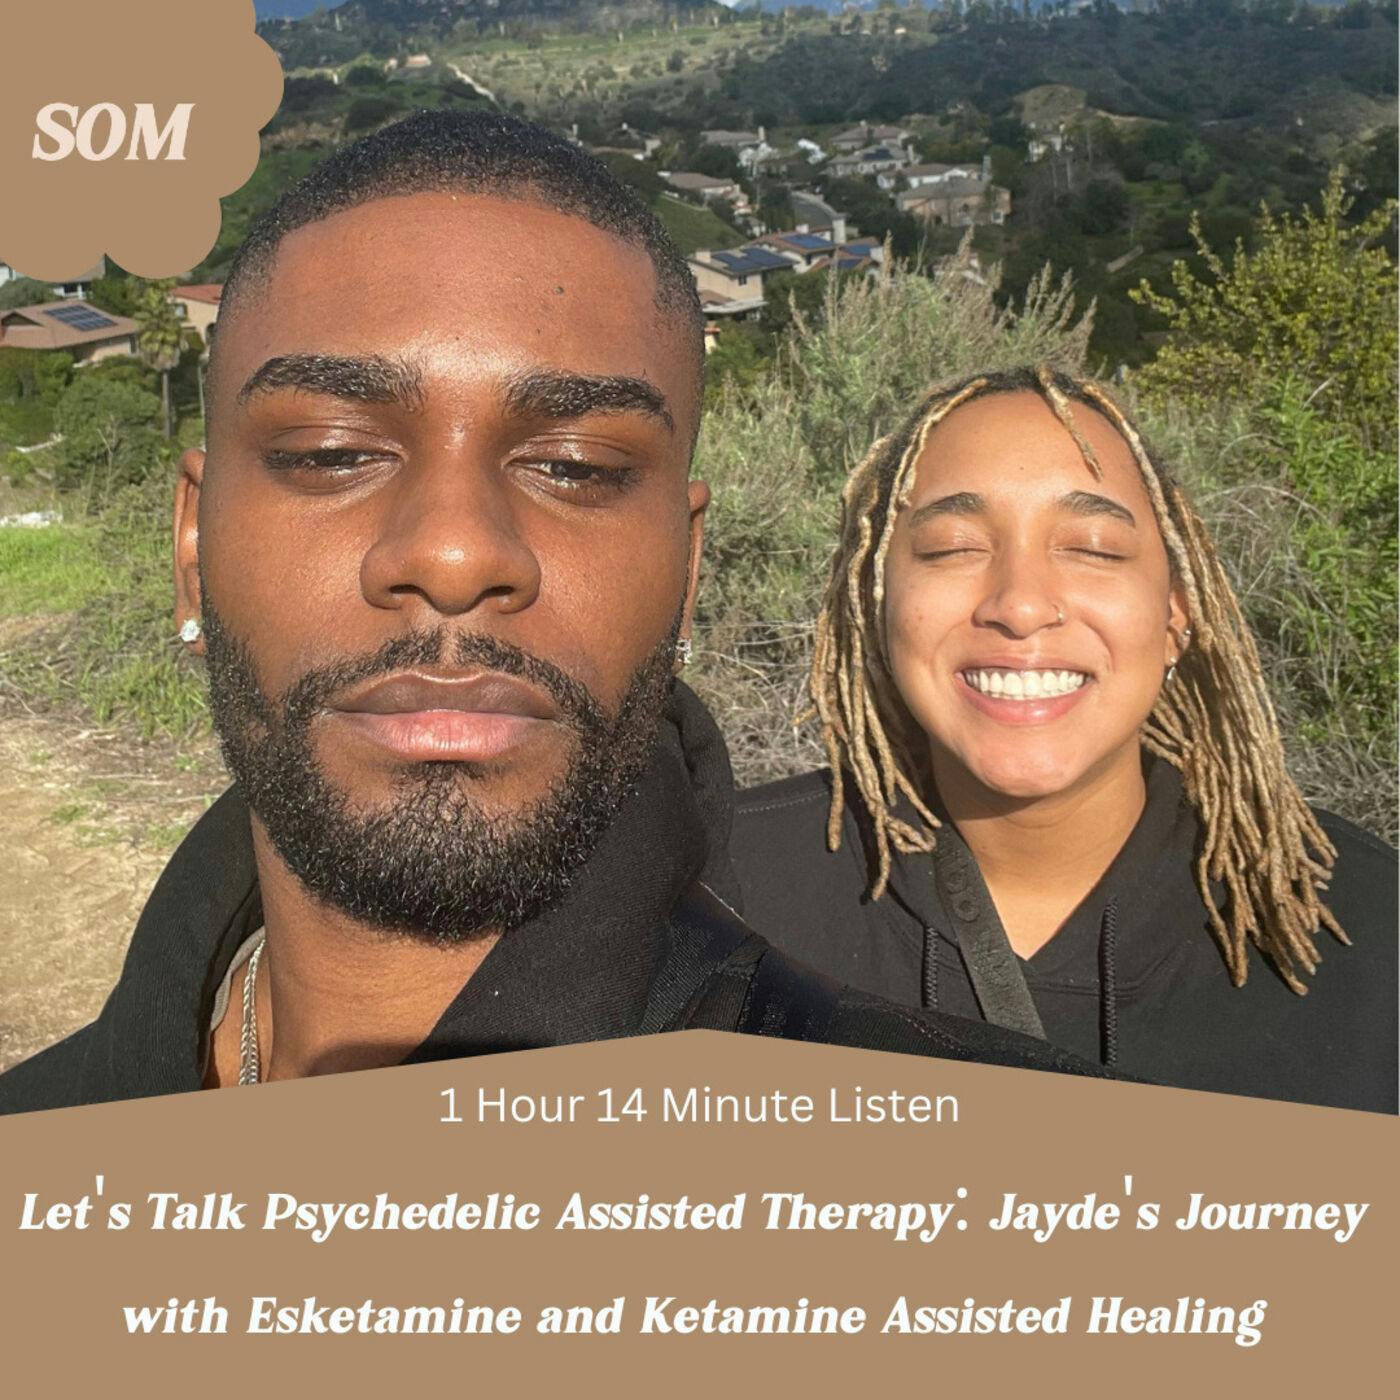 Let's Talk Psychedelic Assisted Therapy: Jayde's Journey with Esketamine and Ketamine Assisted Healing